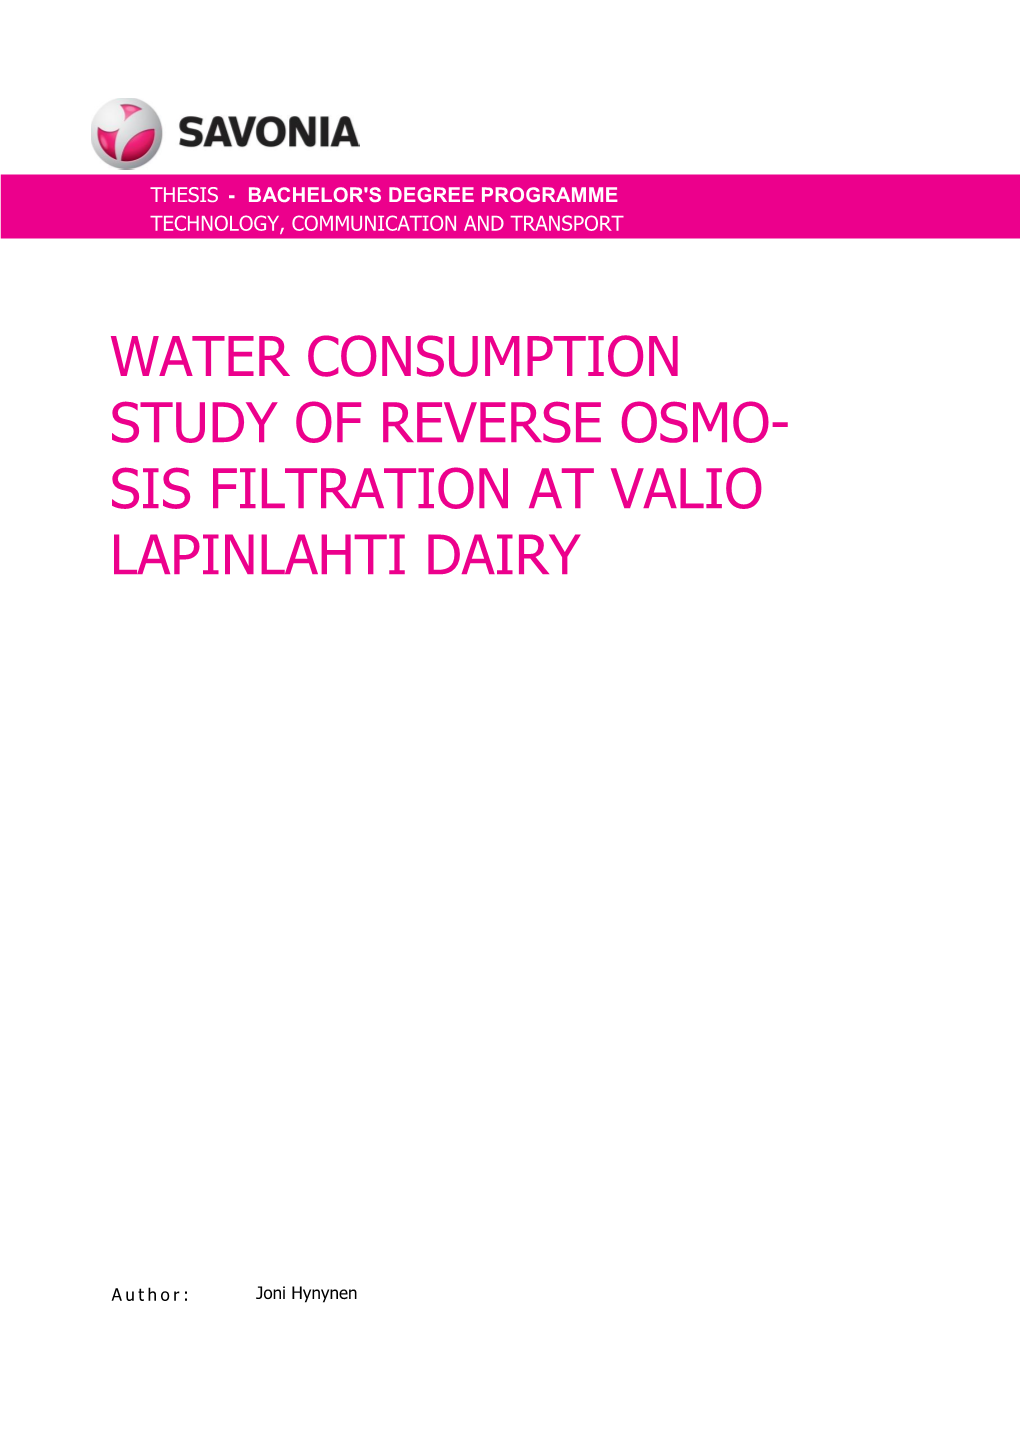 Water Consumption Study of Reverse Osmo- Sis Filtration at Valio Lapinlahti Dairy